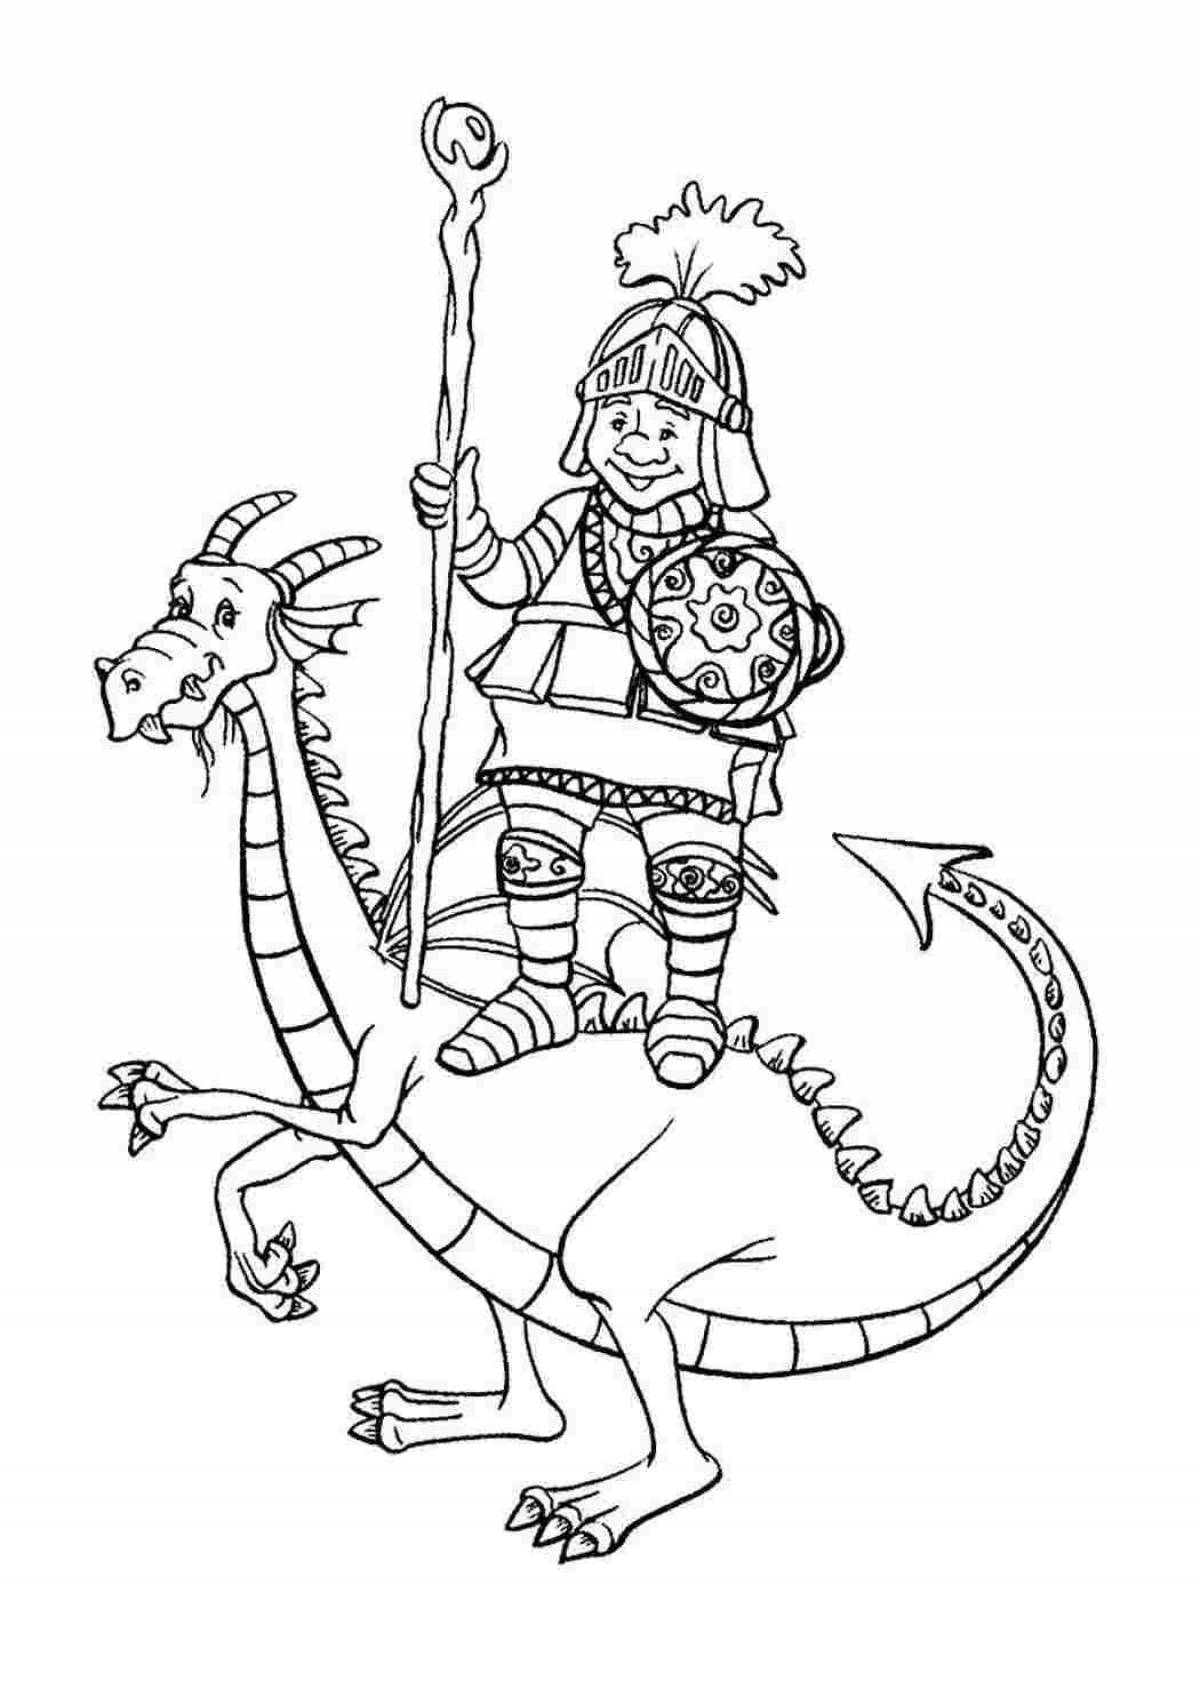 Coloring book formidable knight and dragon